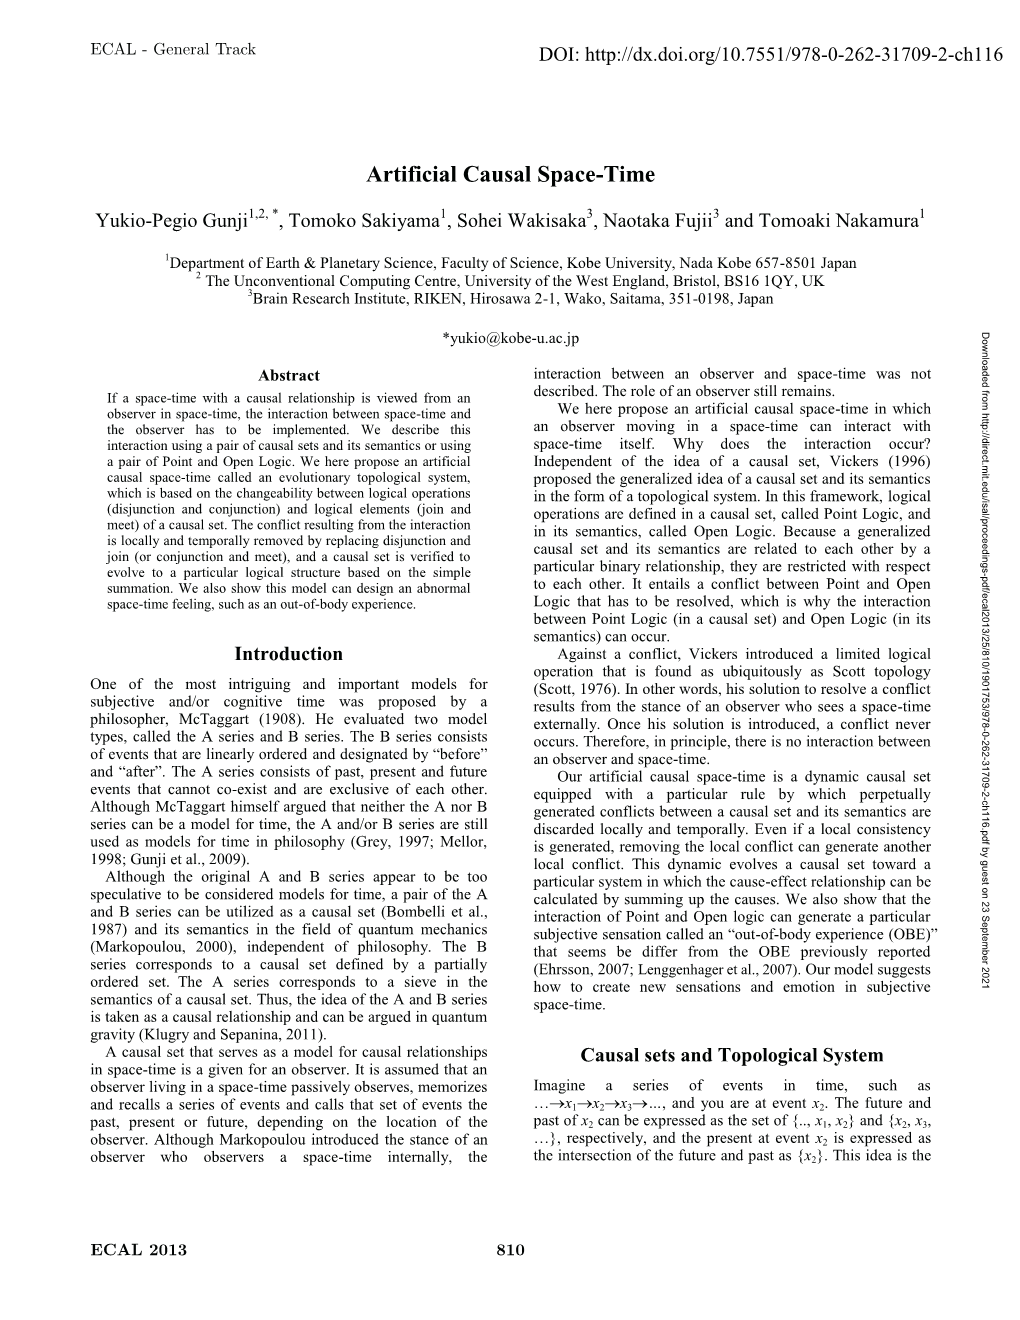 Artificial Causal Space-Time